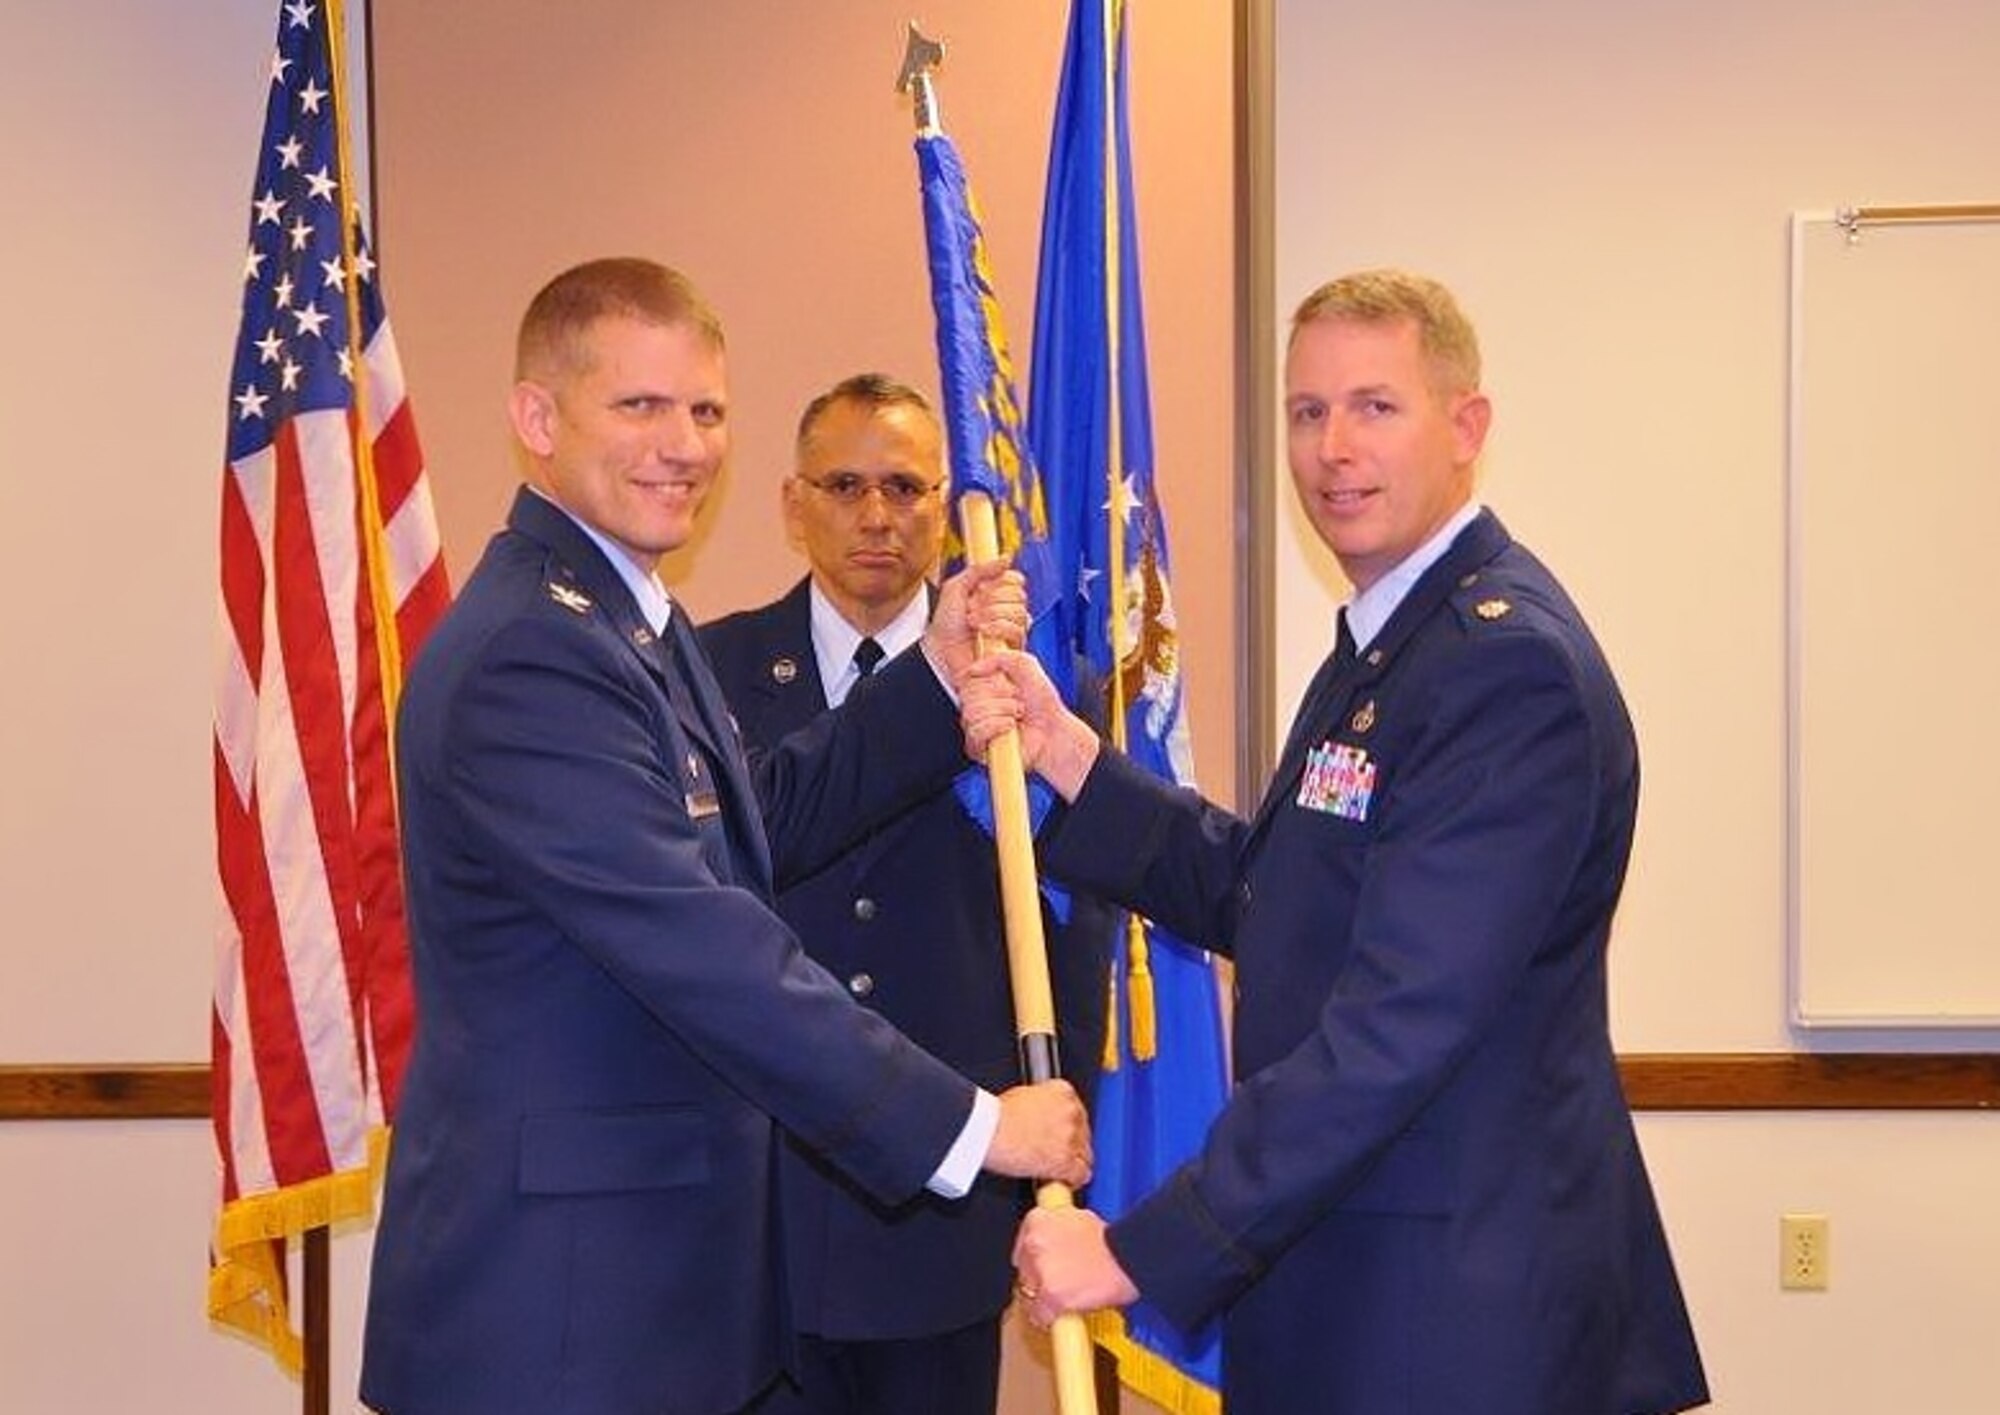 Col. David W. Enfield Jr., left, 433rd Mission Support Group commander, presents the 74th Aerial Port Squadron guidon to  Lt. Col. Travis J. Hatley, the squadron's new commander, during the unit change of command ceremony Nov. 6, 2016 at Joint Base San Antonio-Lackland, Texas. (U.S. Air Force Photo by Capt. Cris Medina)